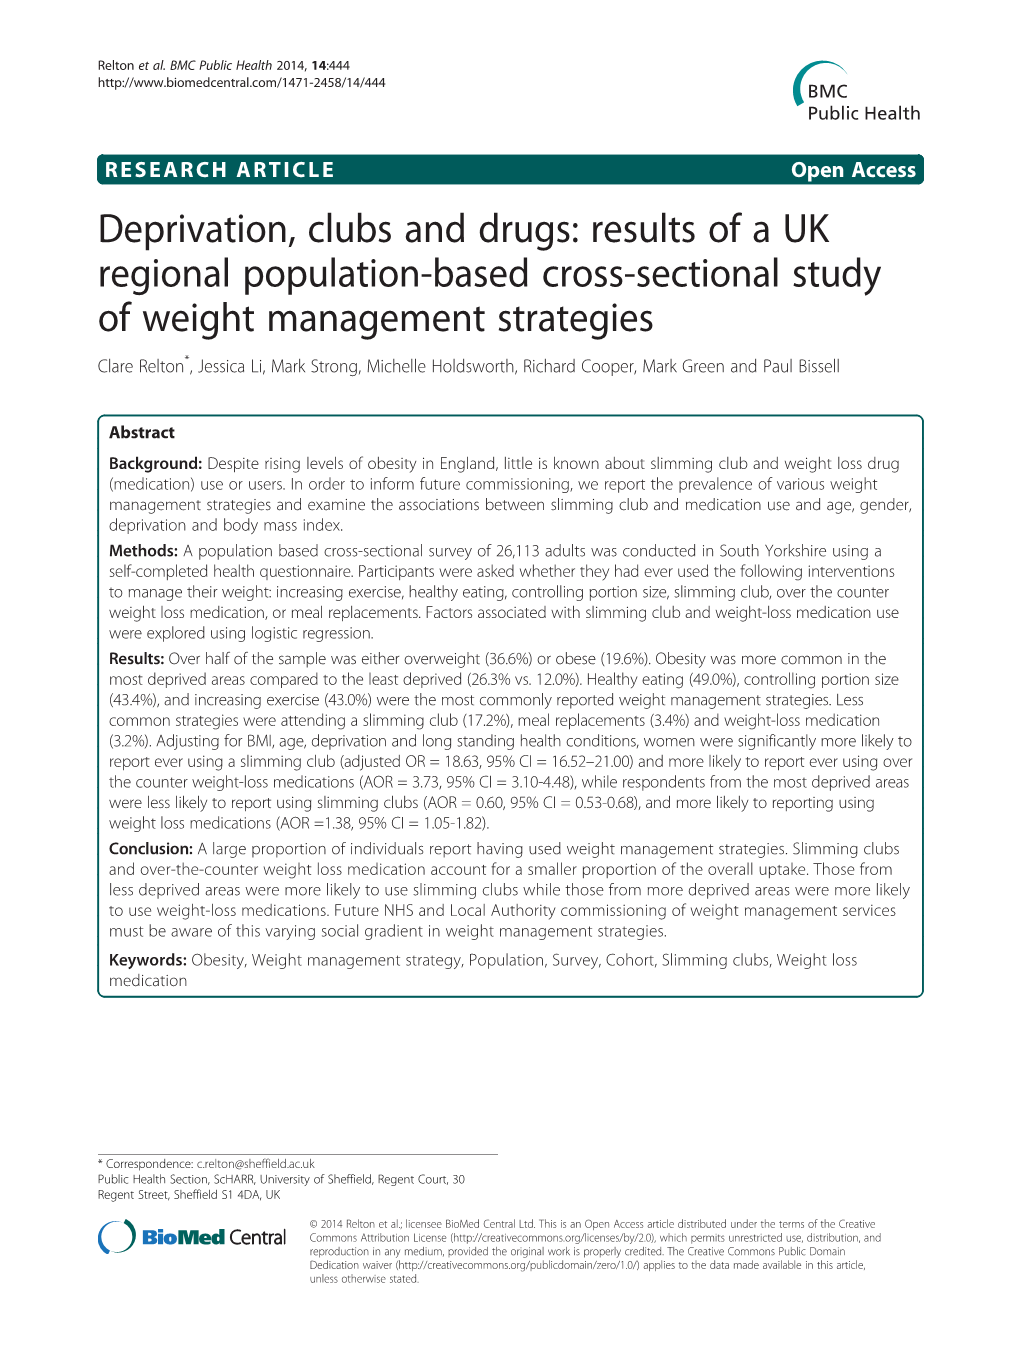 Results of a UK Regional Population-Based Cross-Sectional Study of Weight Management Strategies